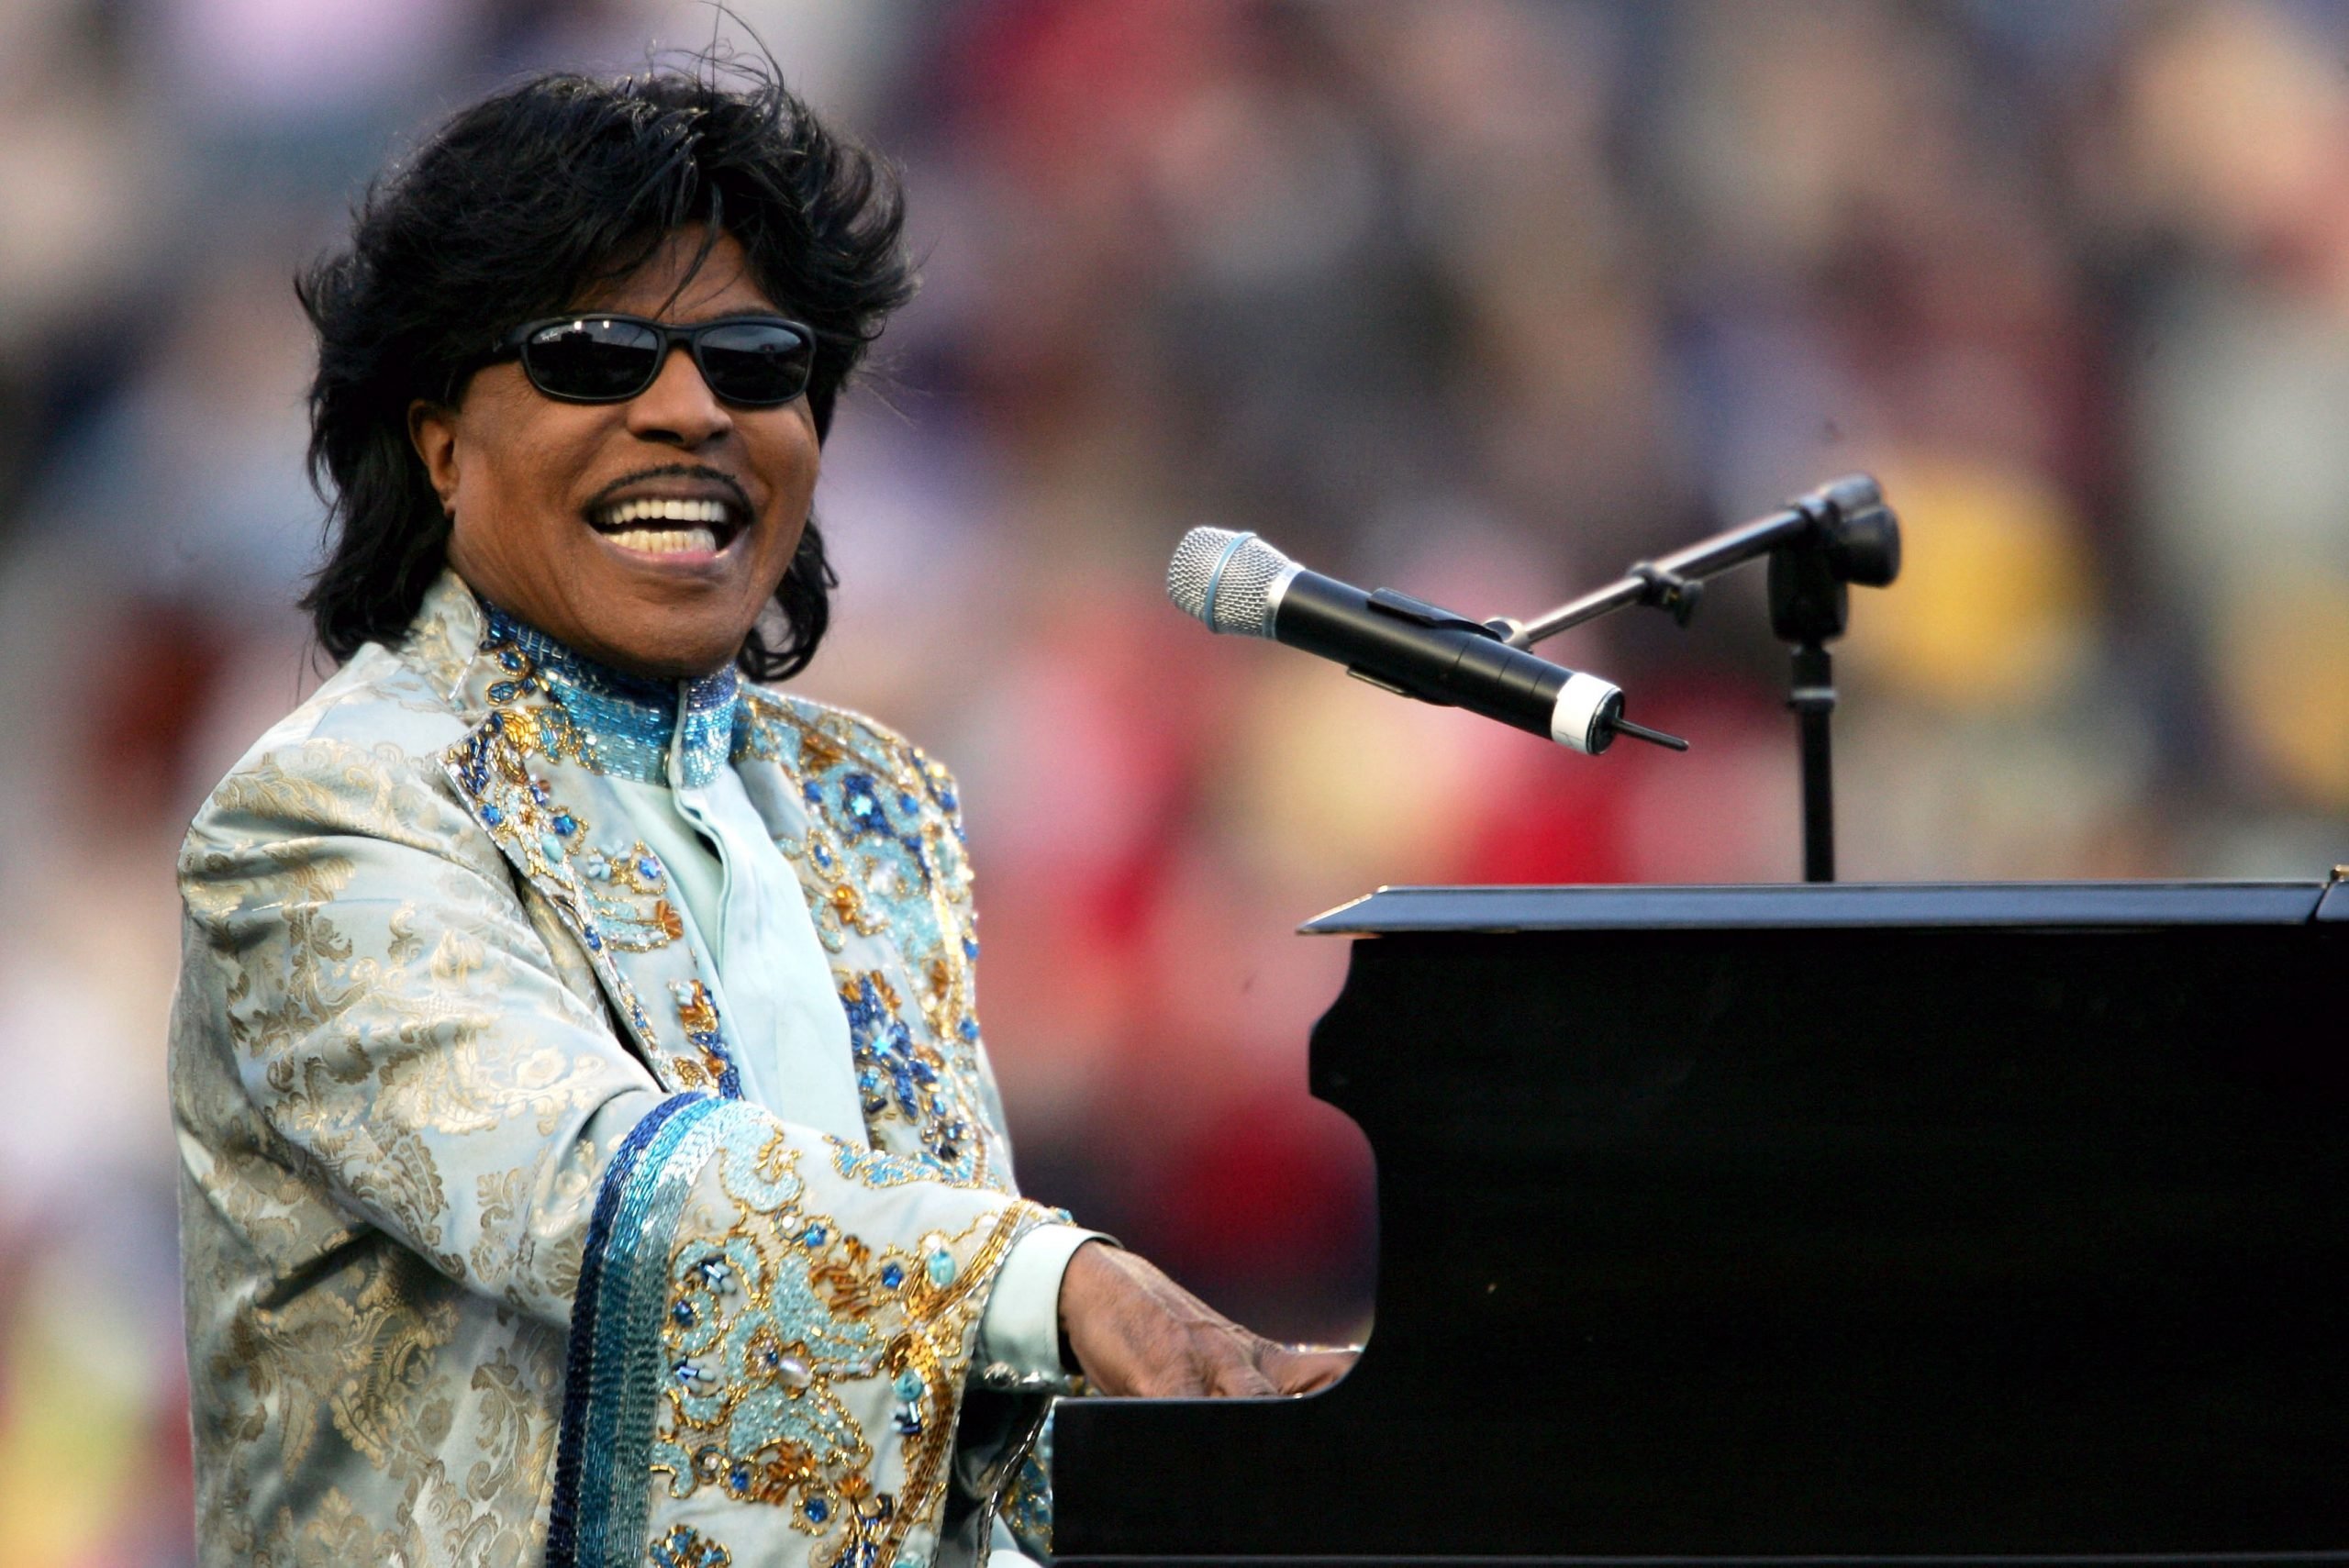 Little Richard, regarded by many as the true King of Rock n Roll instead of Elvis, performing at the piano